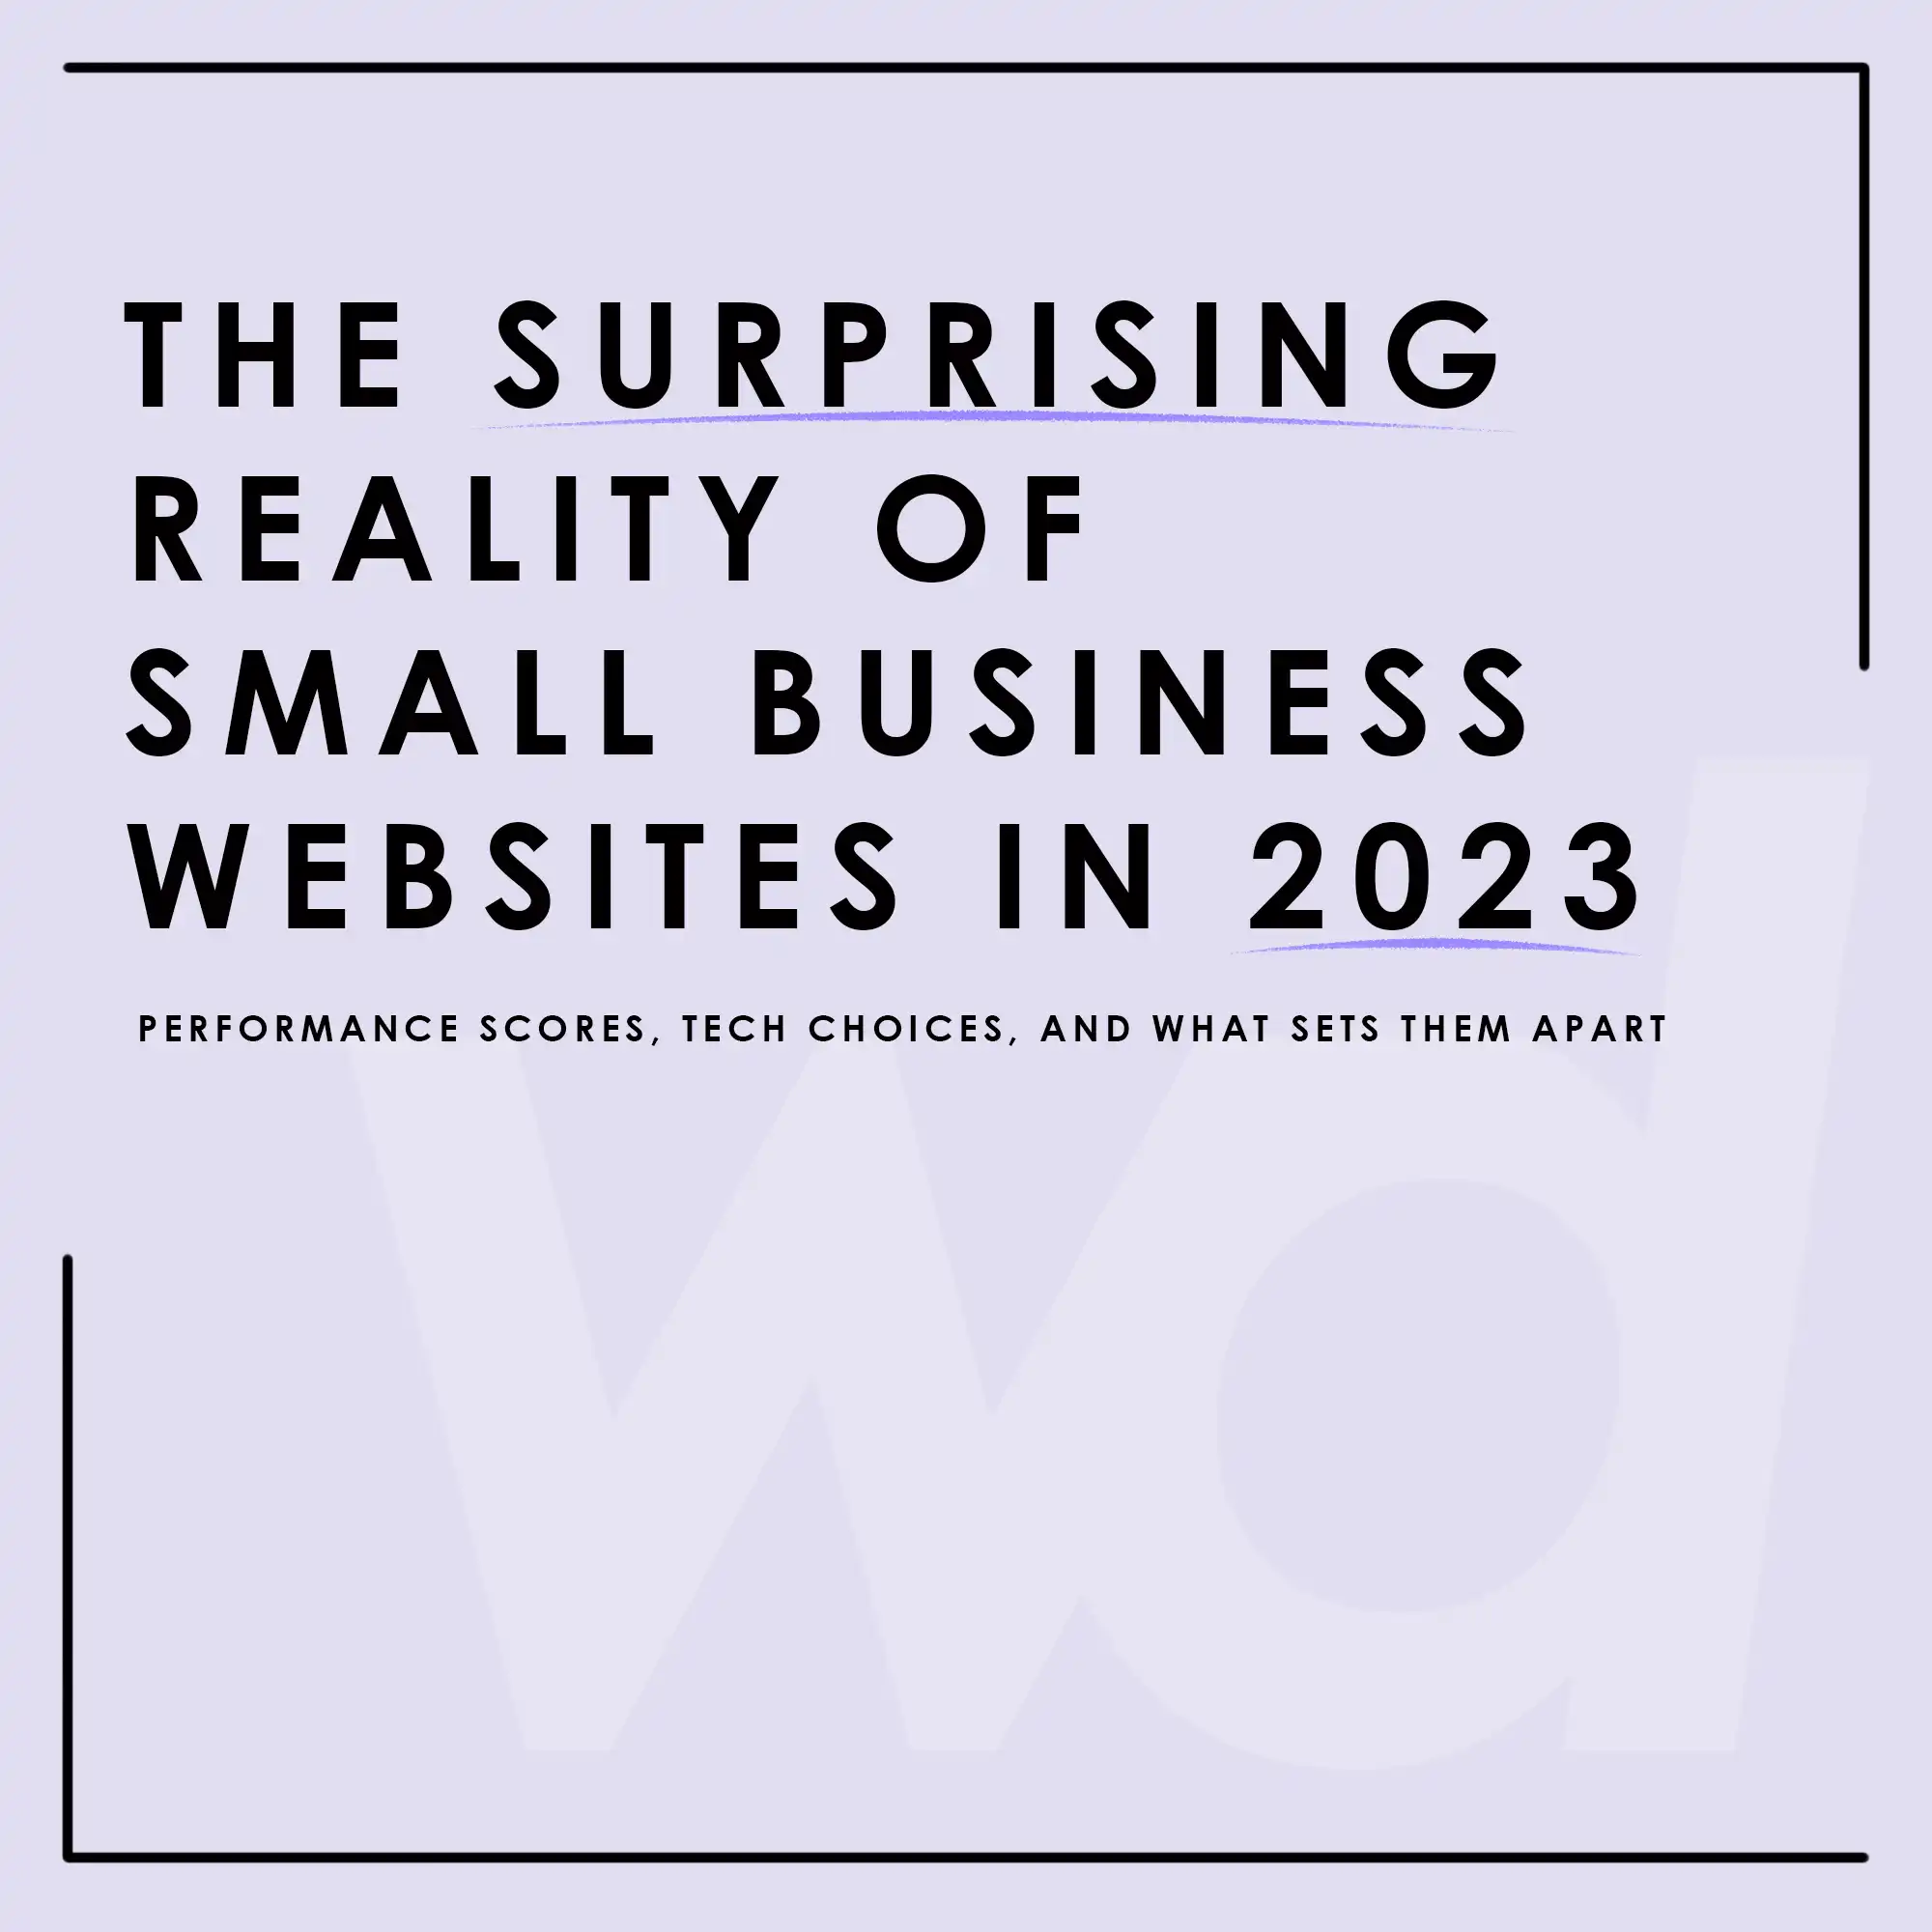 Surprising Reality of Small Business Websites cover image